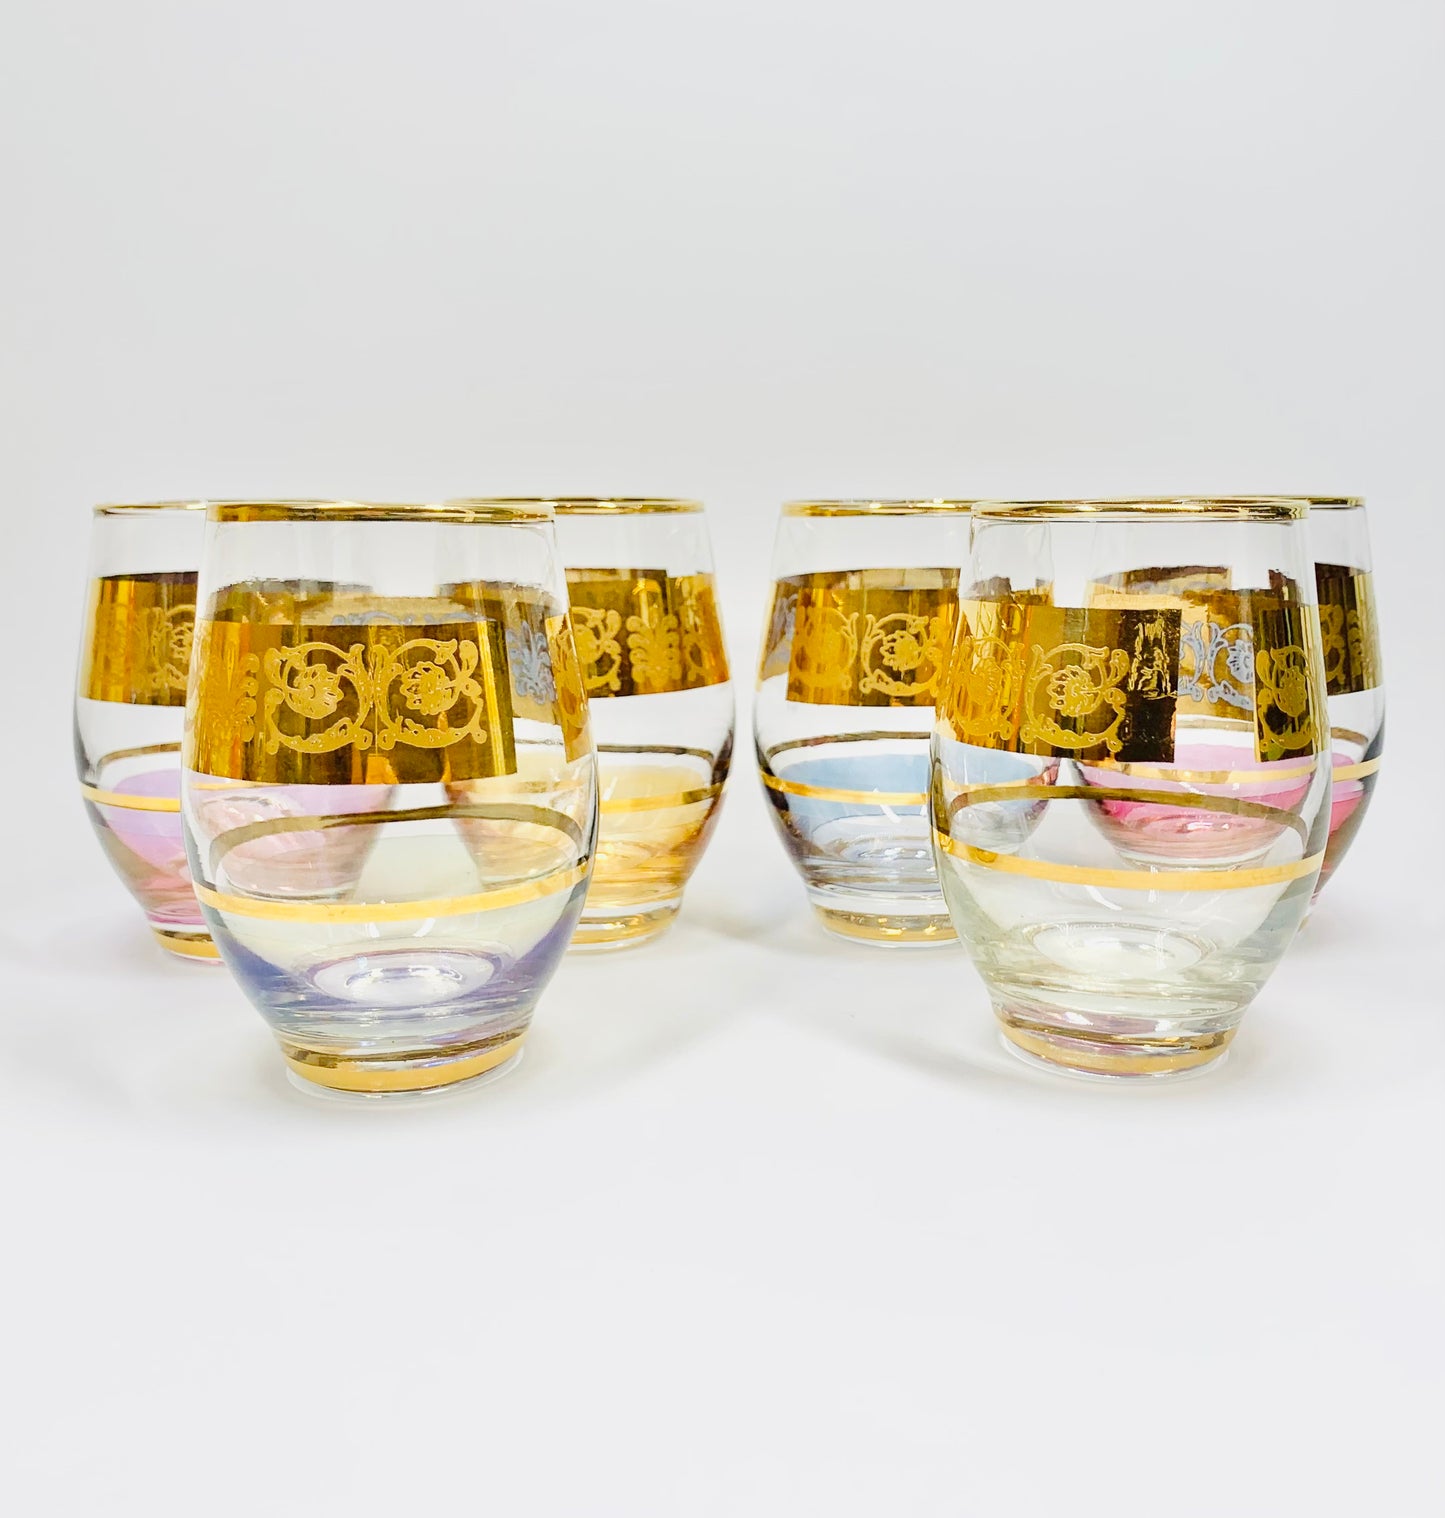 Extremely rare 1940s harlequin 24K gold gilded iridescent lustreware glass water tumblers